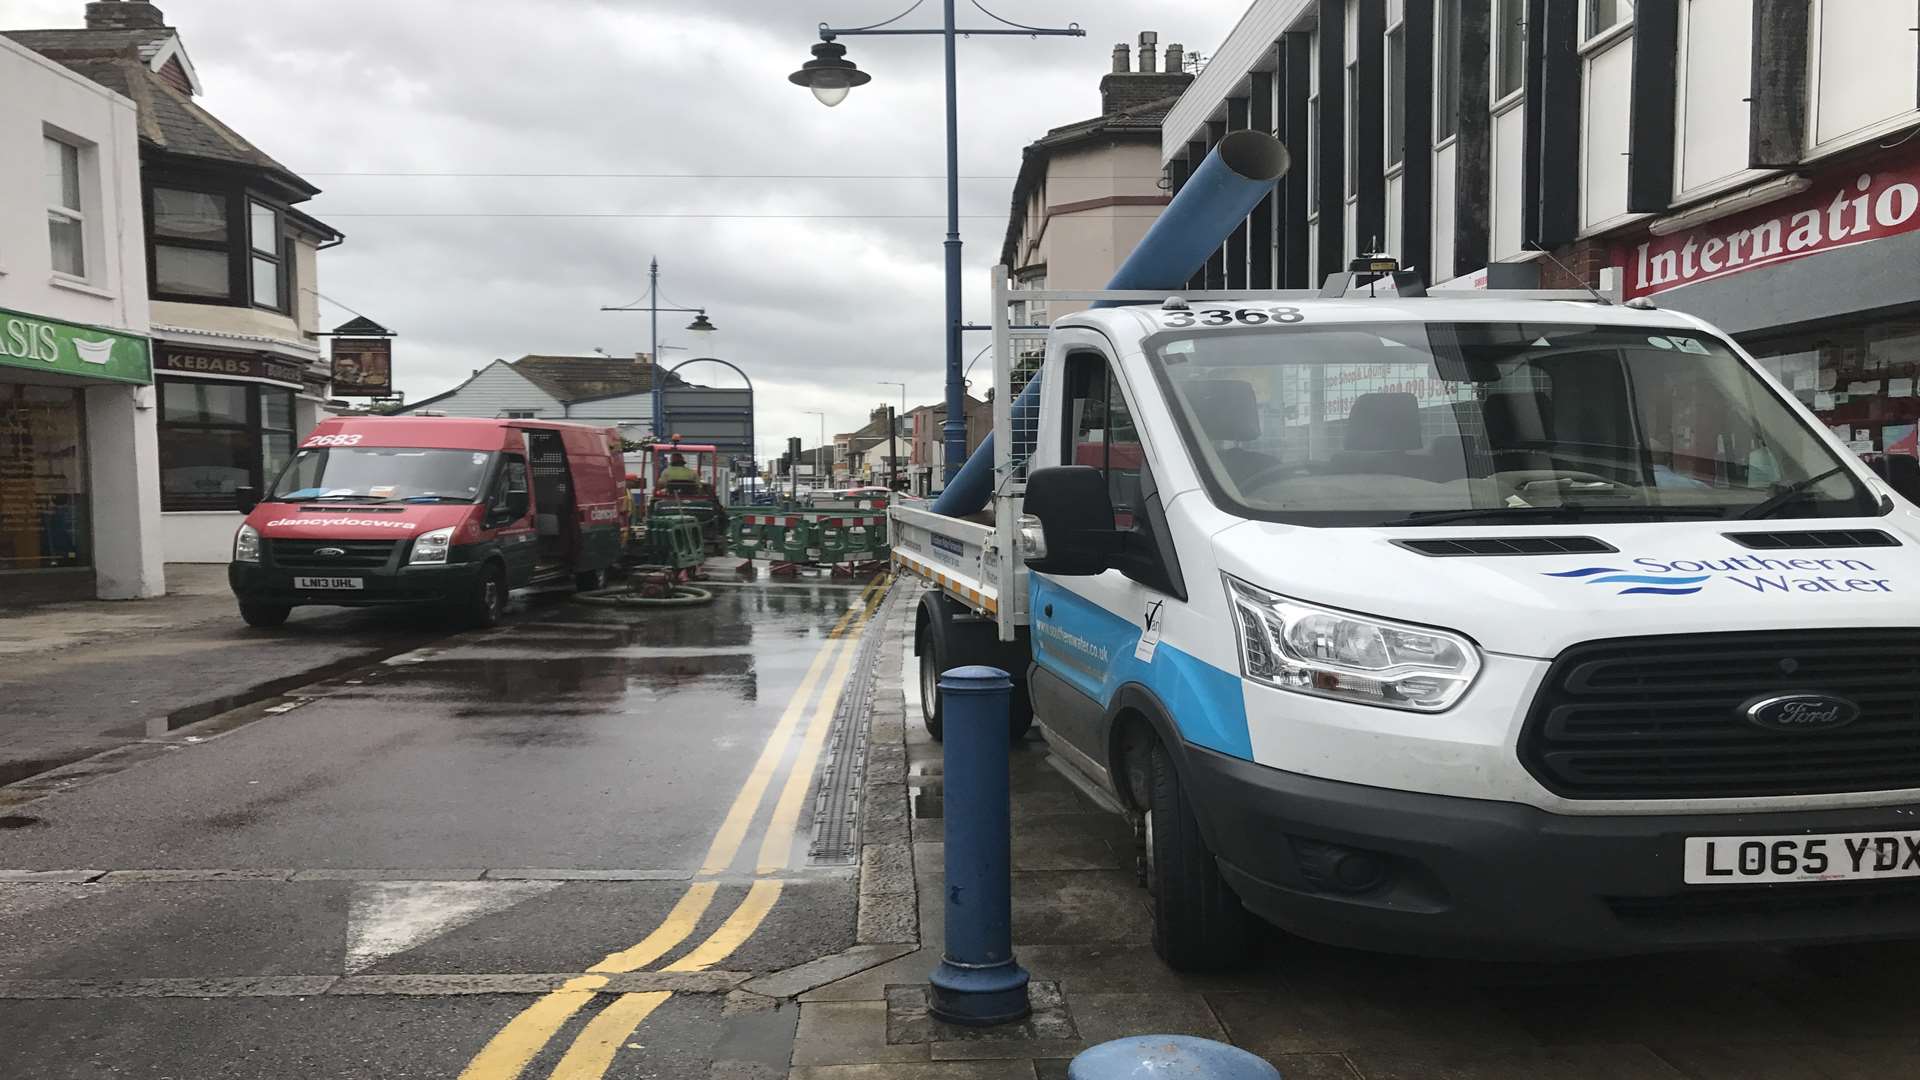 A burst water main forced the closure of Sheerness High Street